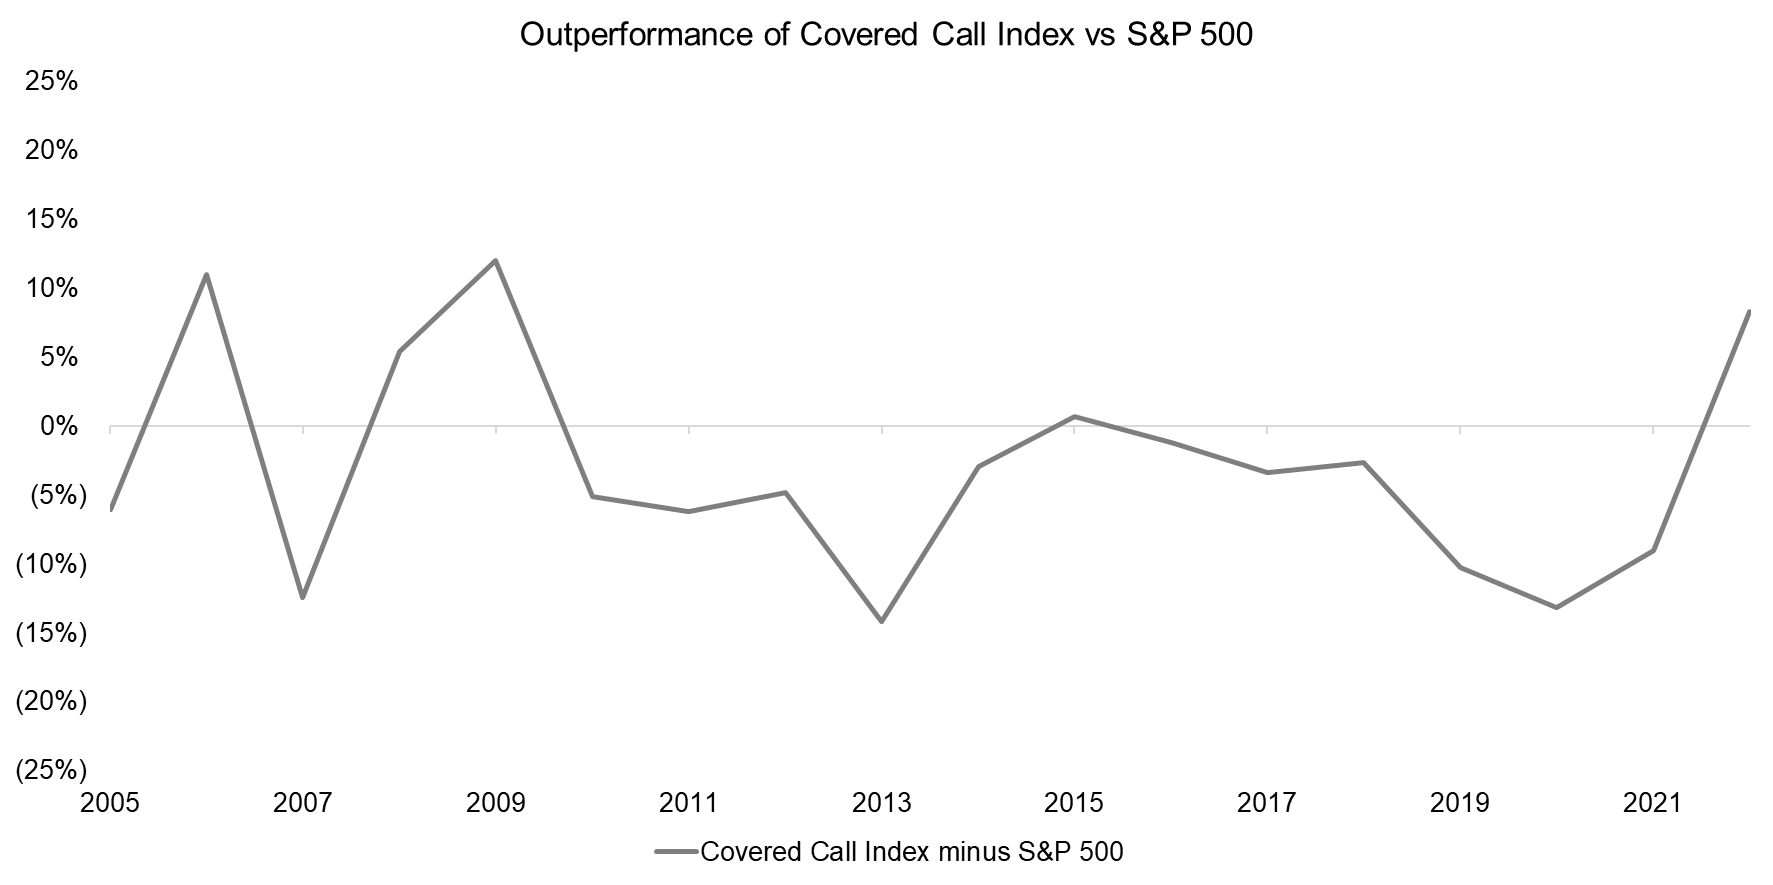 Outperformance of Covered Call Index vs S&P 500